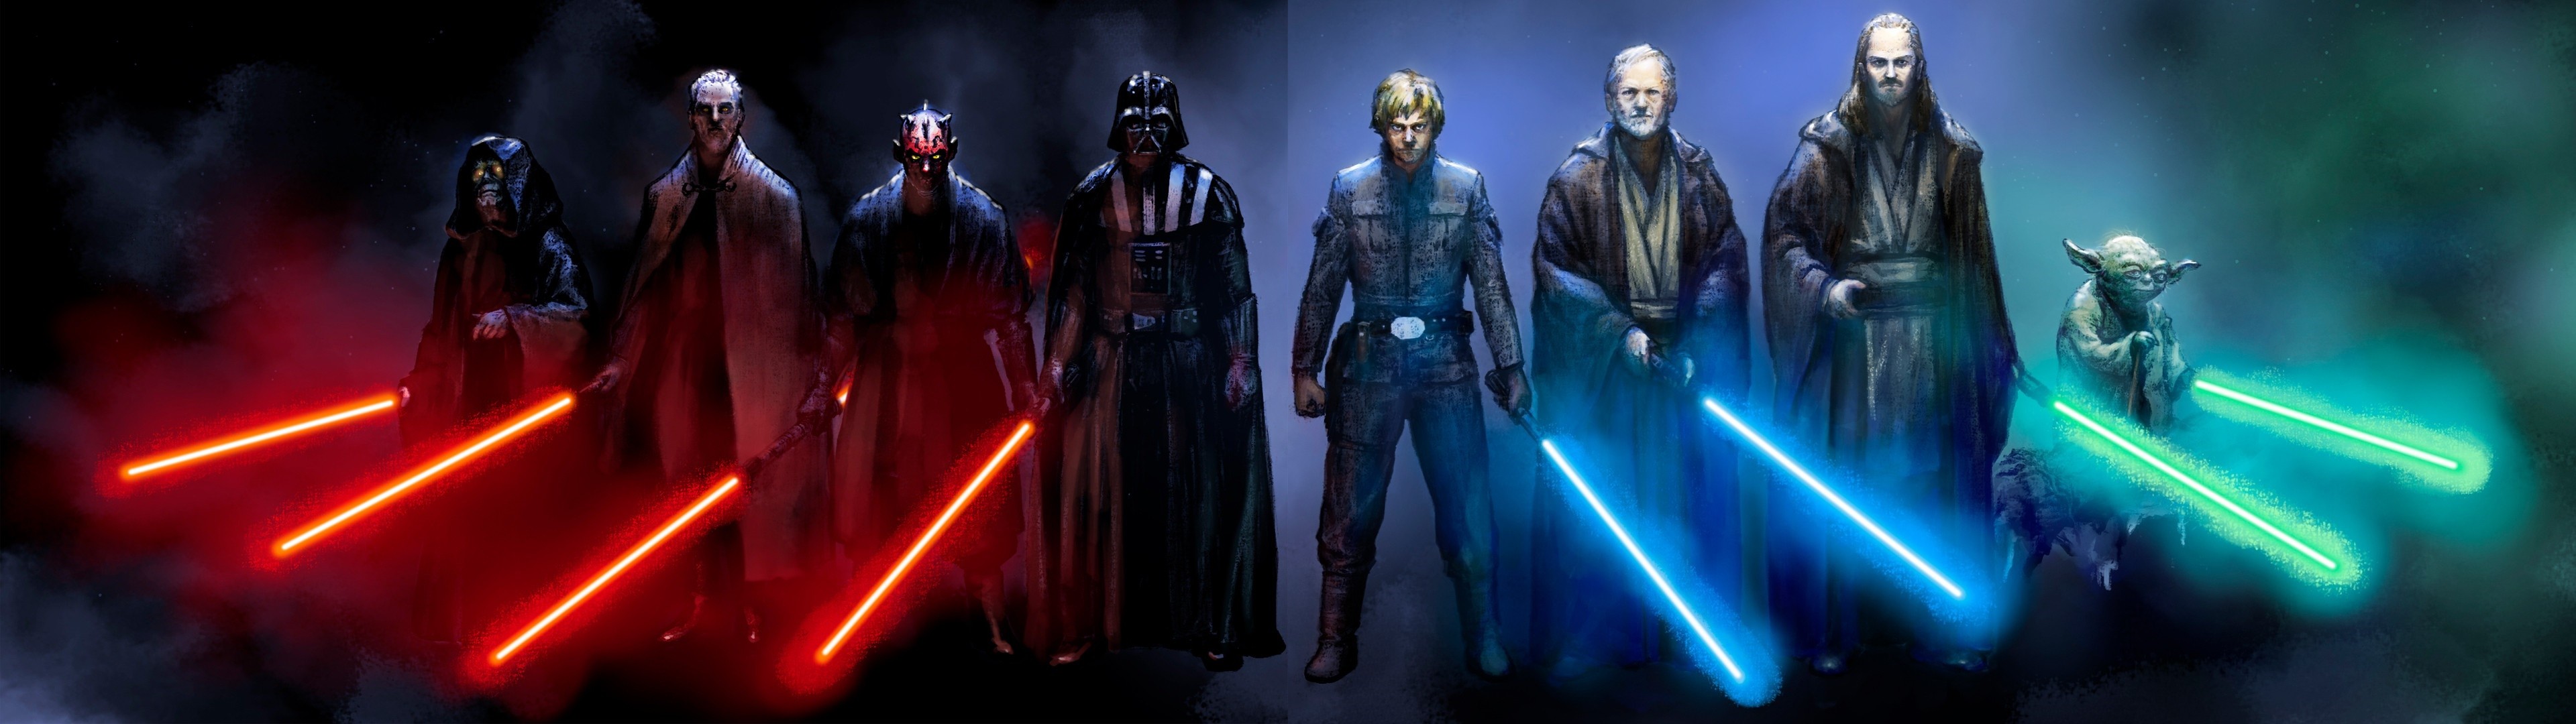 3840x1080 Star Wars The Sith Lords and The Jedi Knights